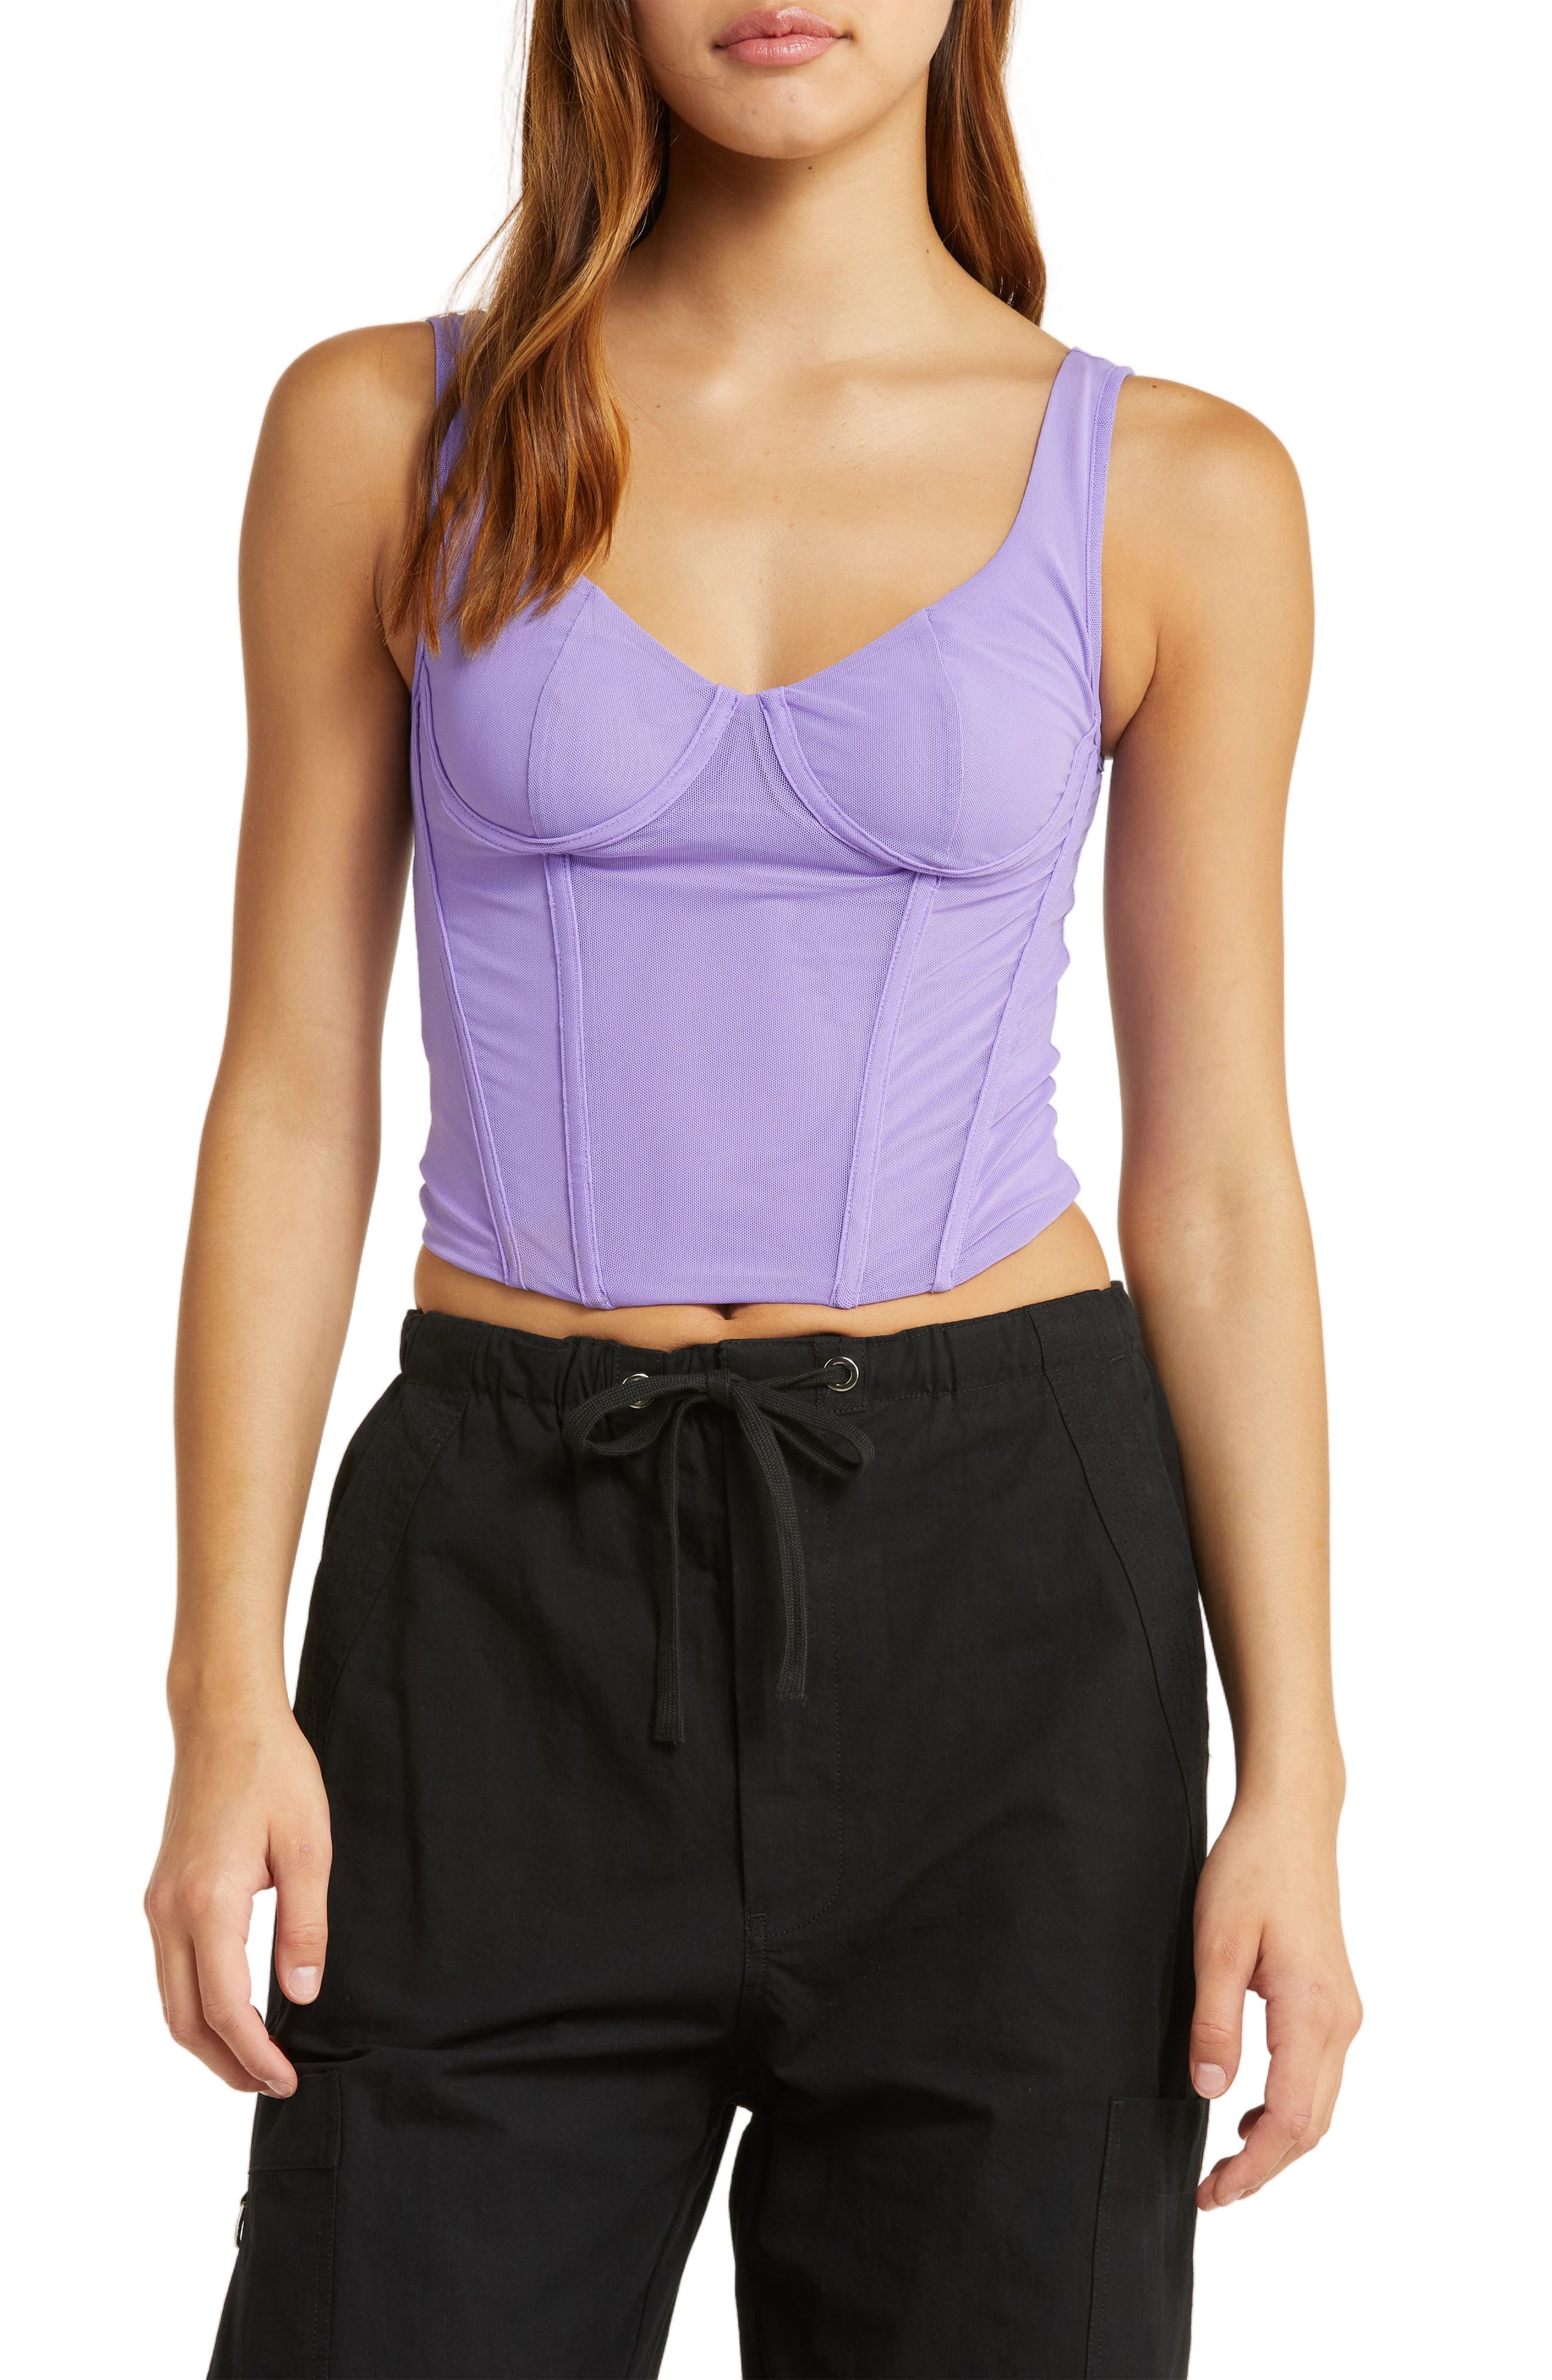 BY.DYLN BY. DYLN Kane Underwire Mesh Corset Top in Lilac